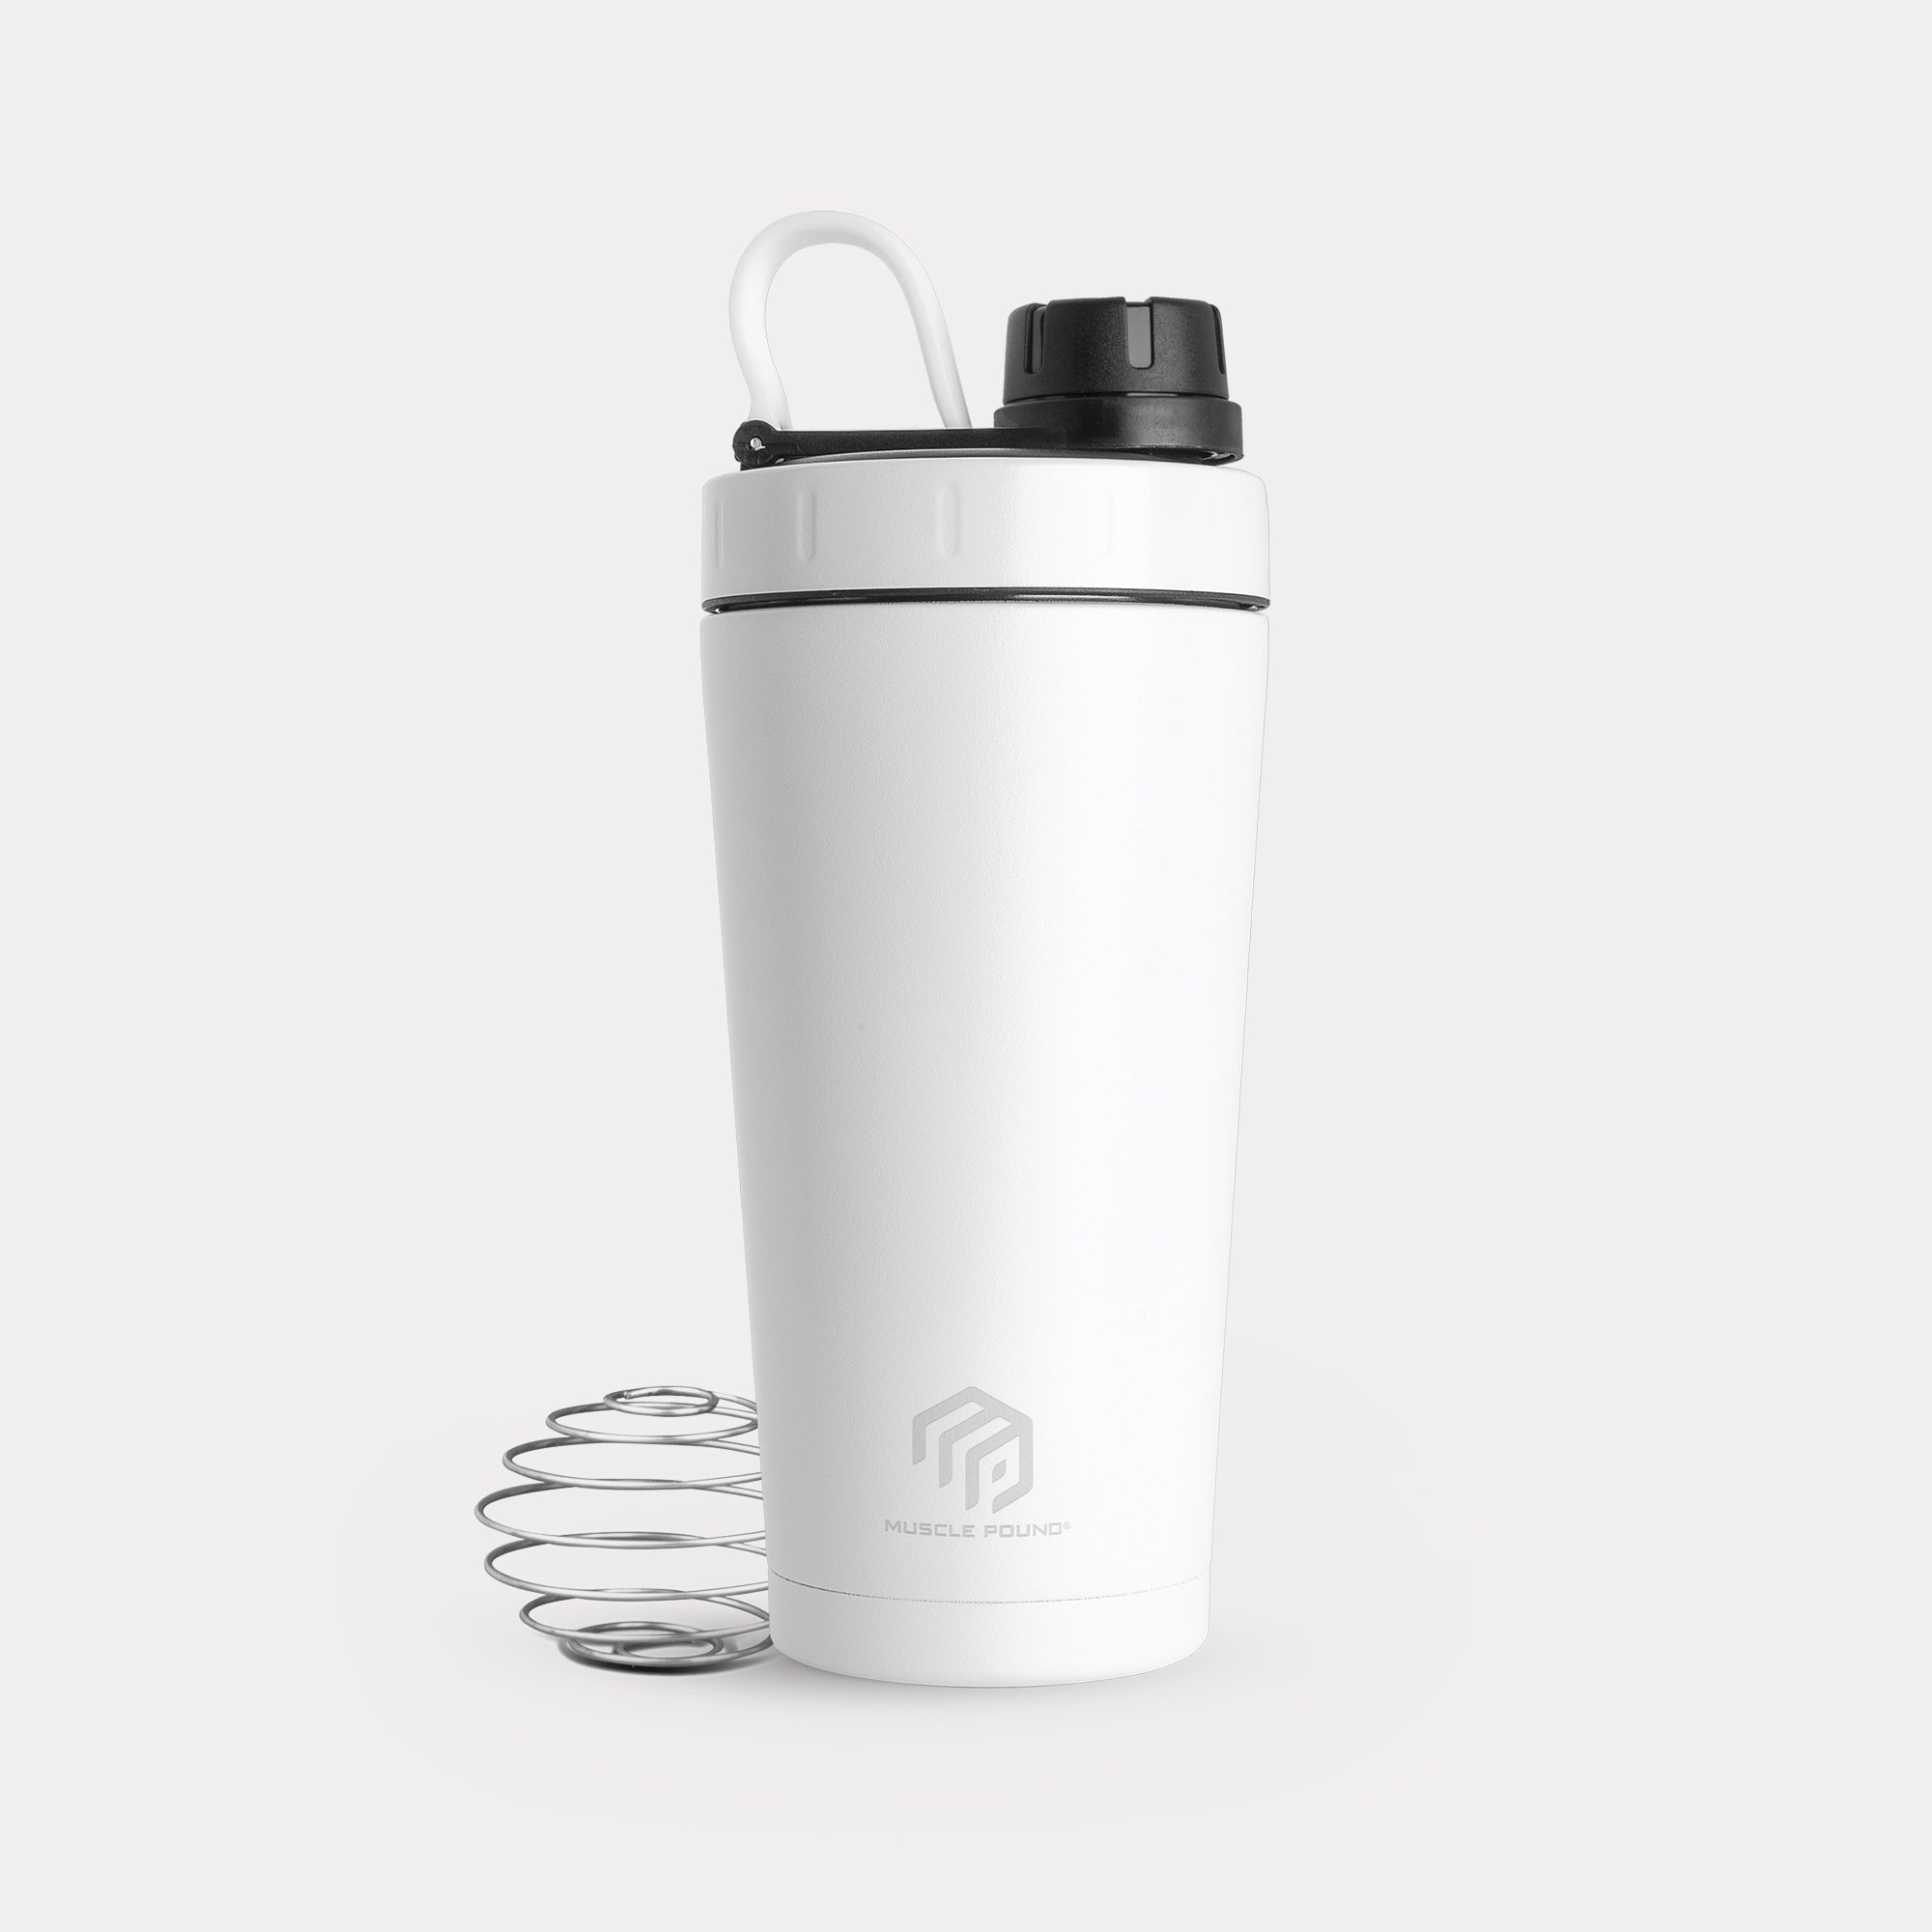 Stay refreshed and hydrated with our white insulated shaker bottle.